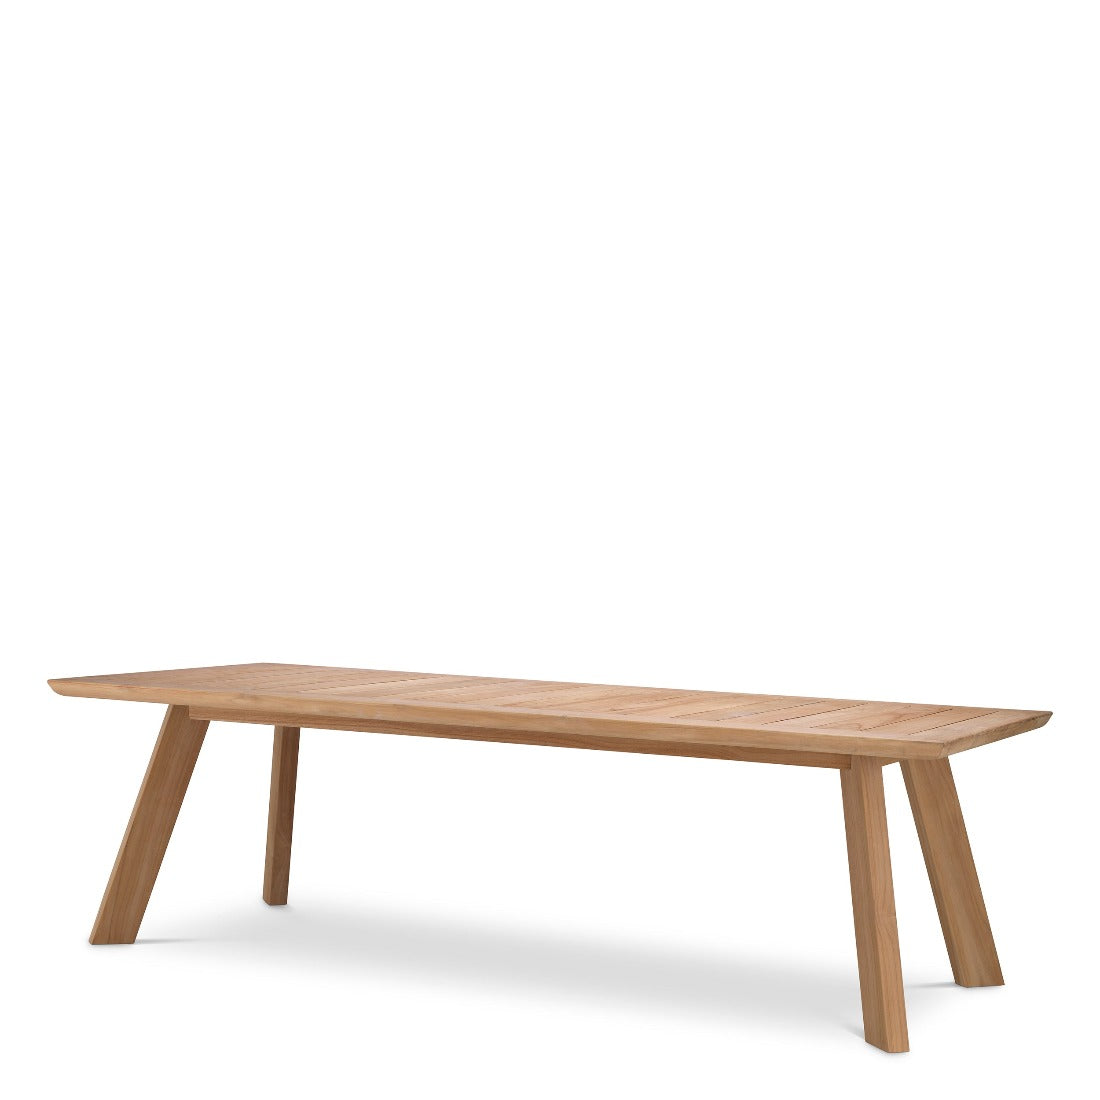 Outdoor dining table Eichholtz Merati Natural